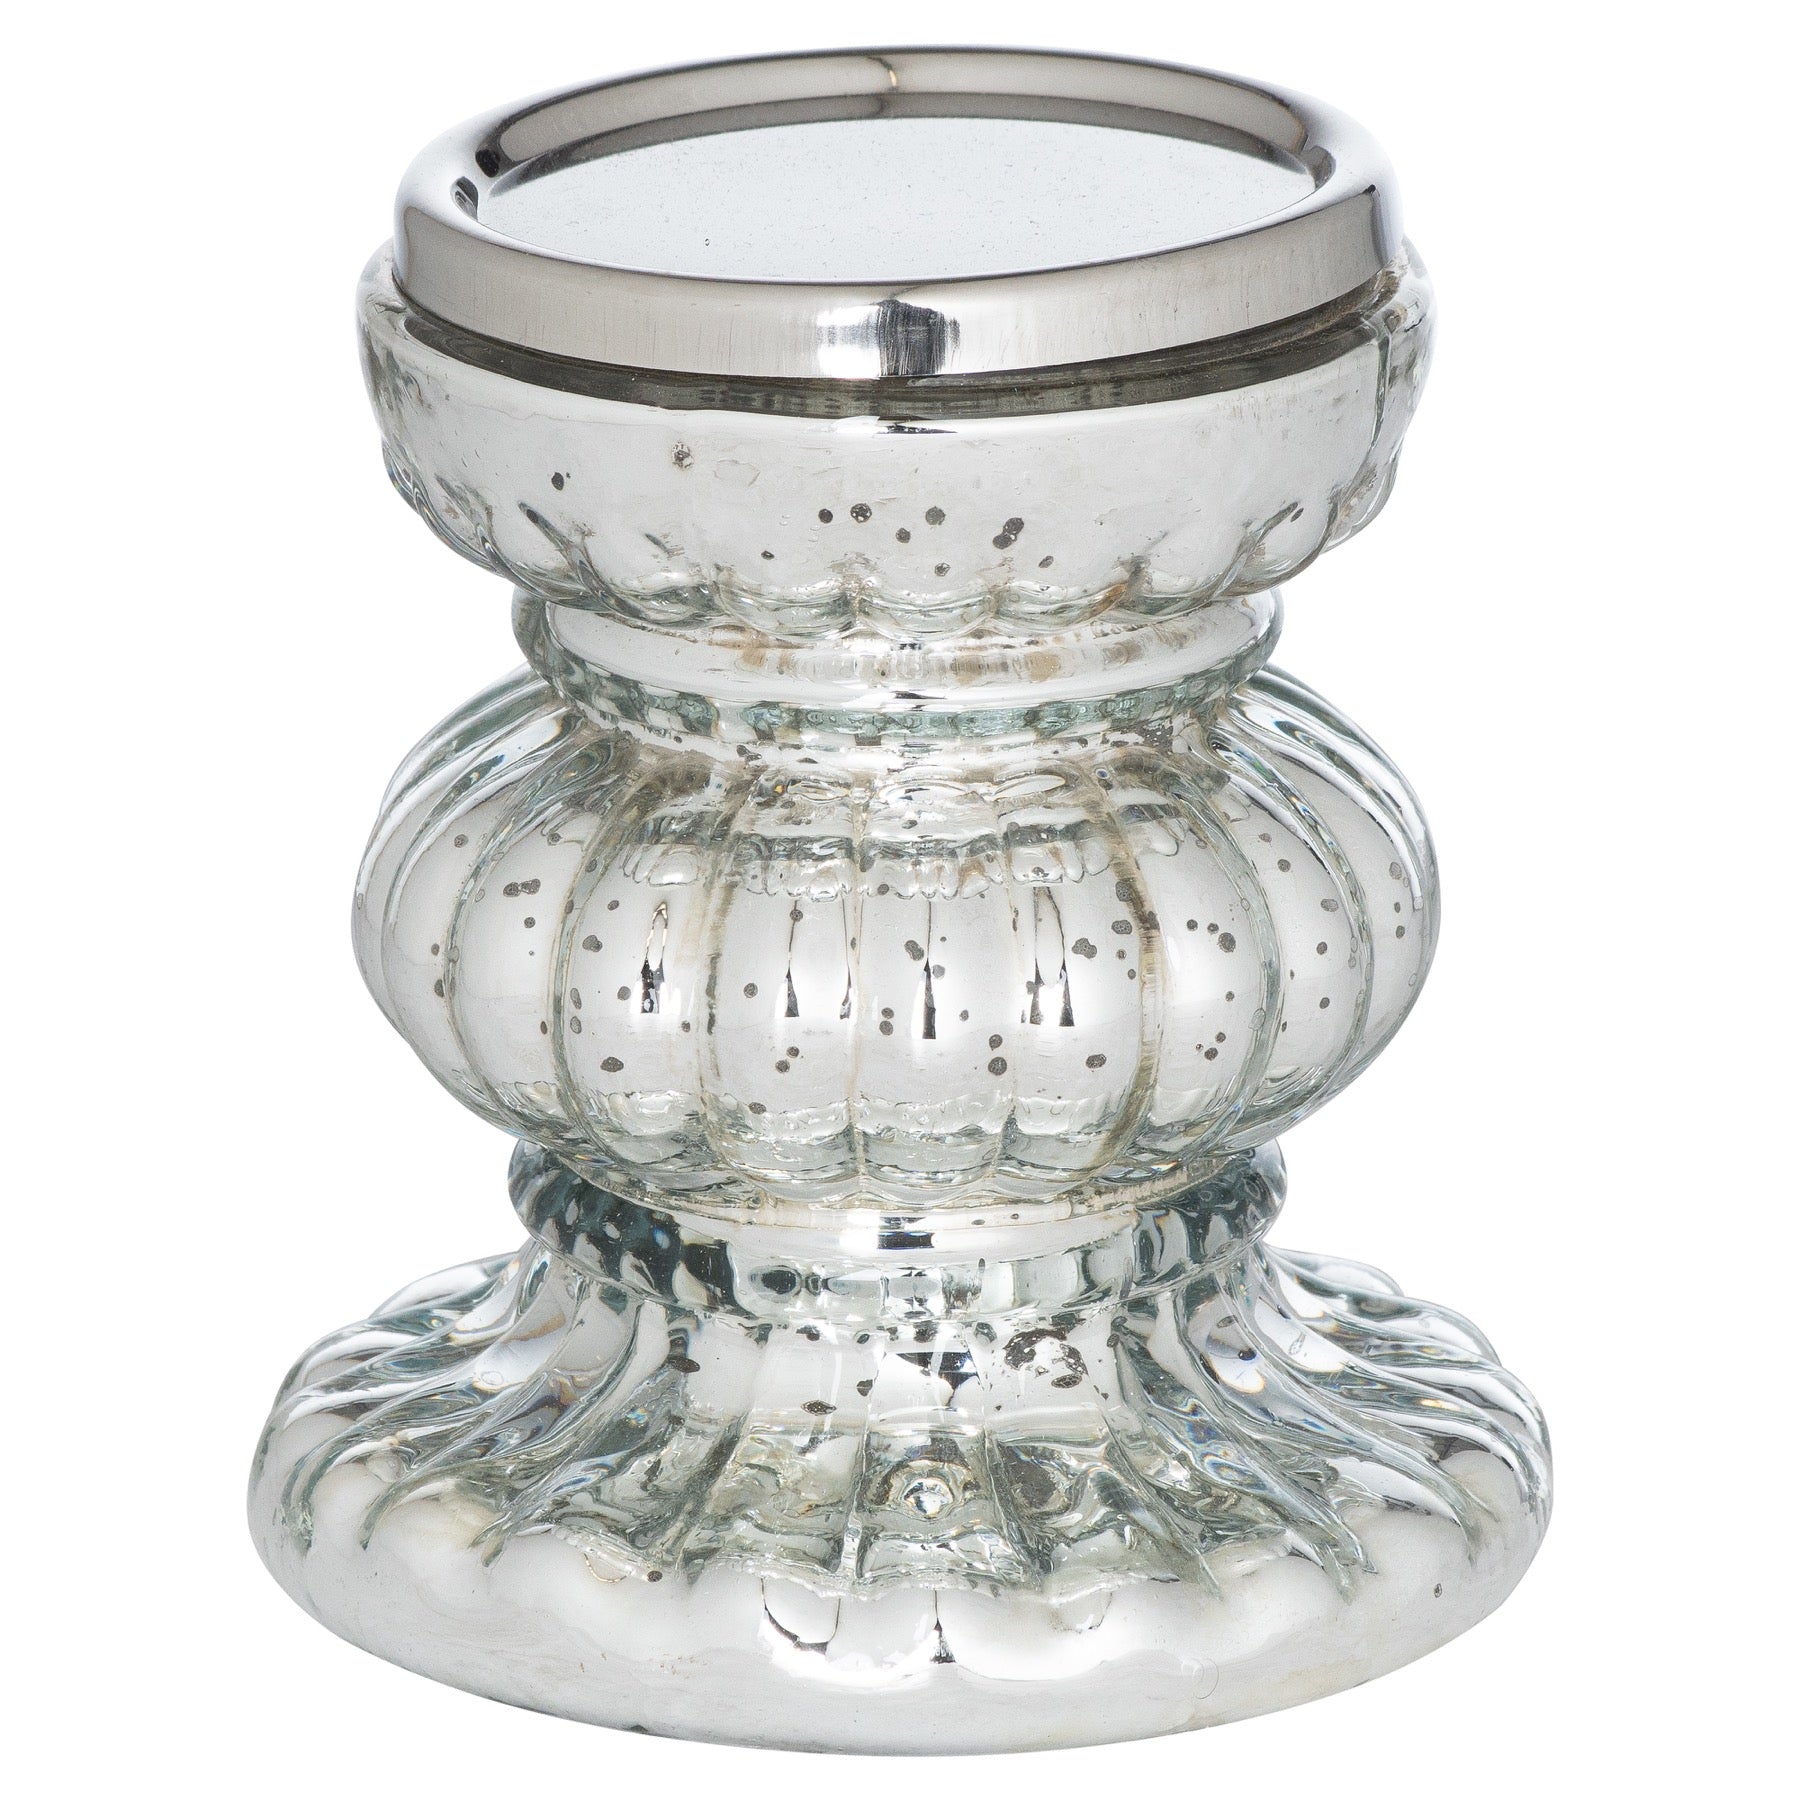 Stunning Silver Candle Holder